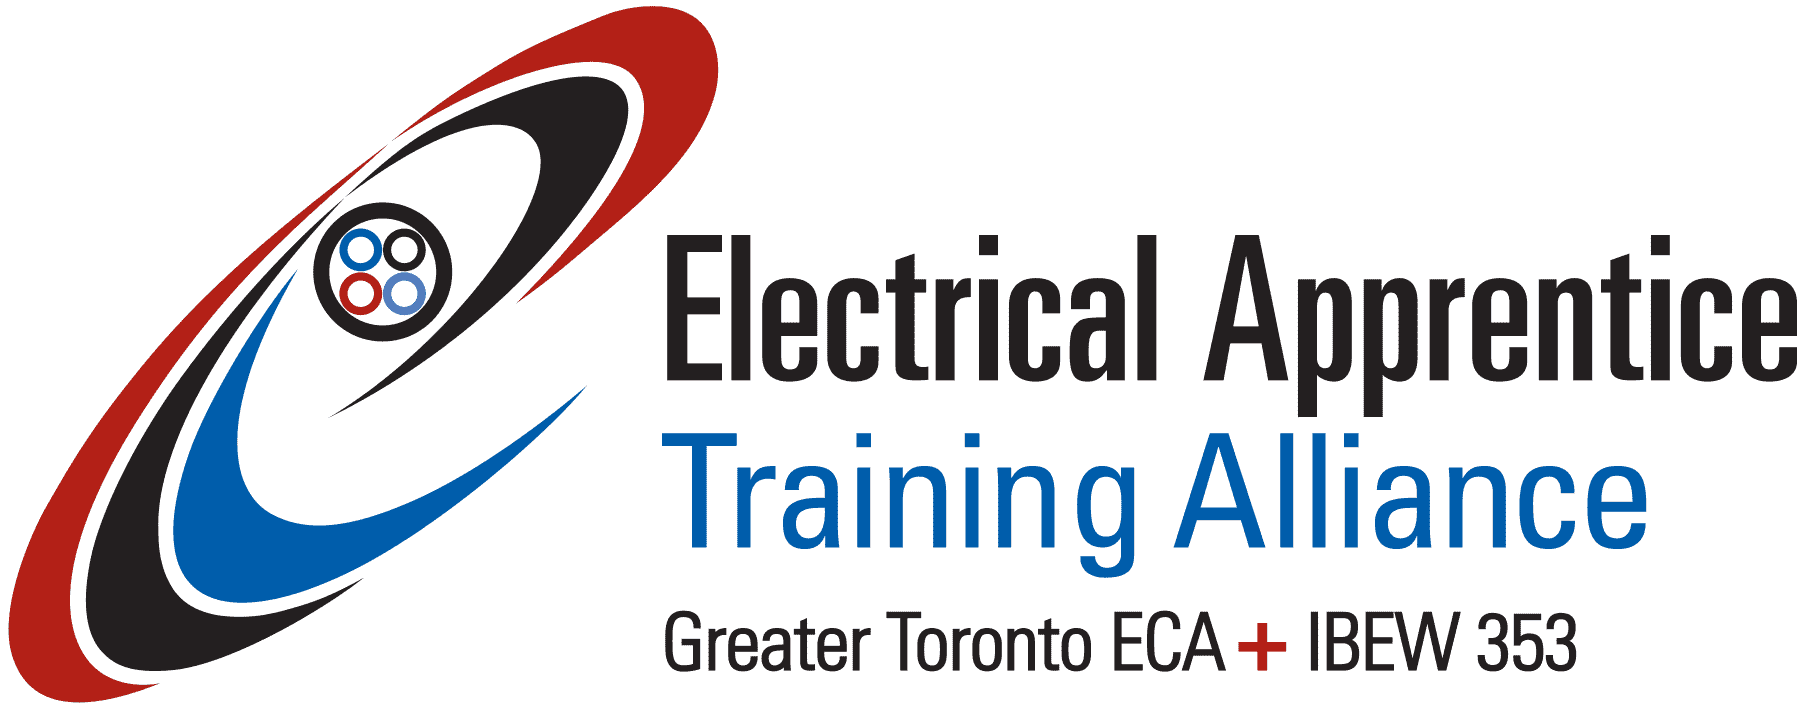 The Electrical Apprentice Training Alliance 